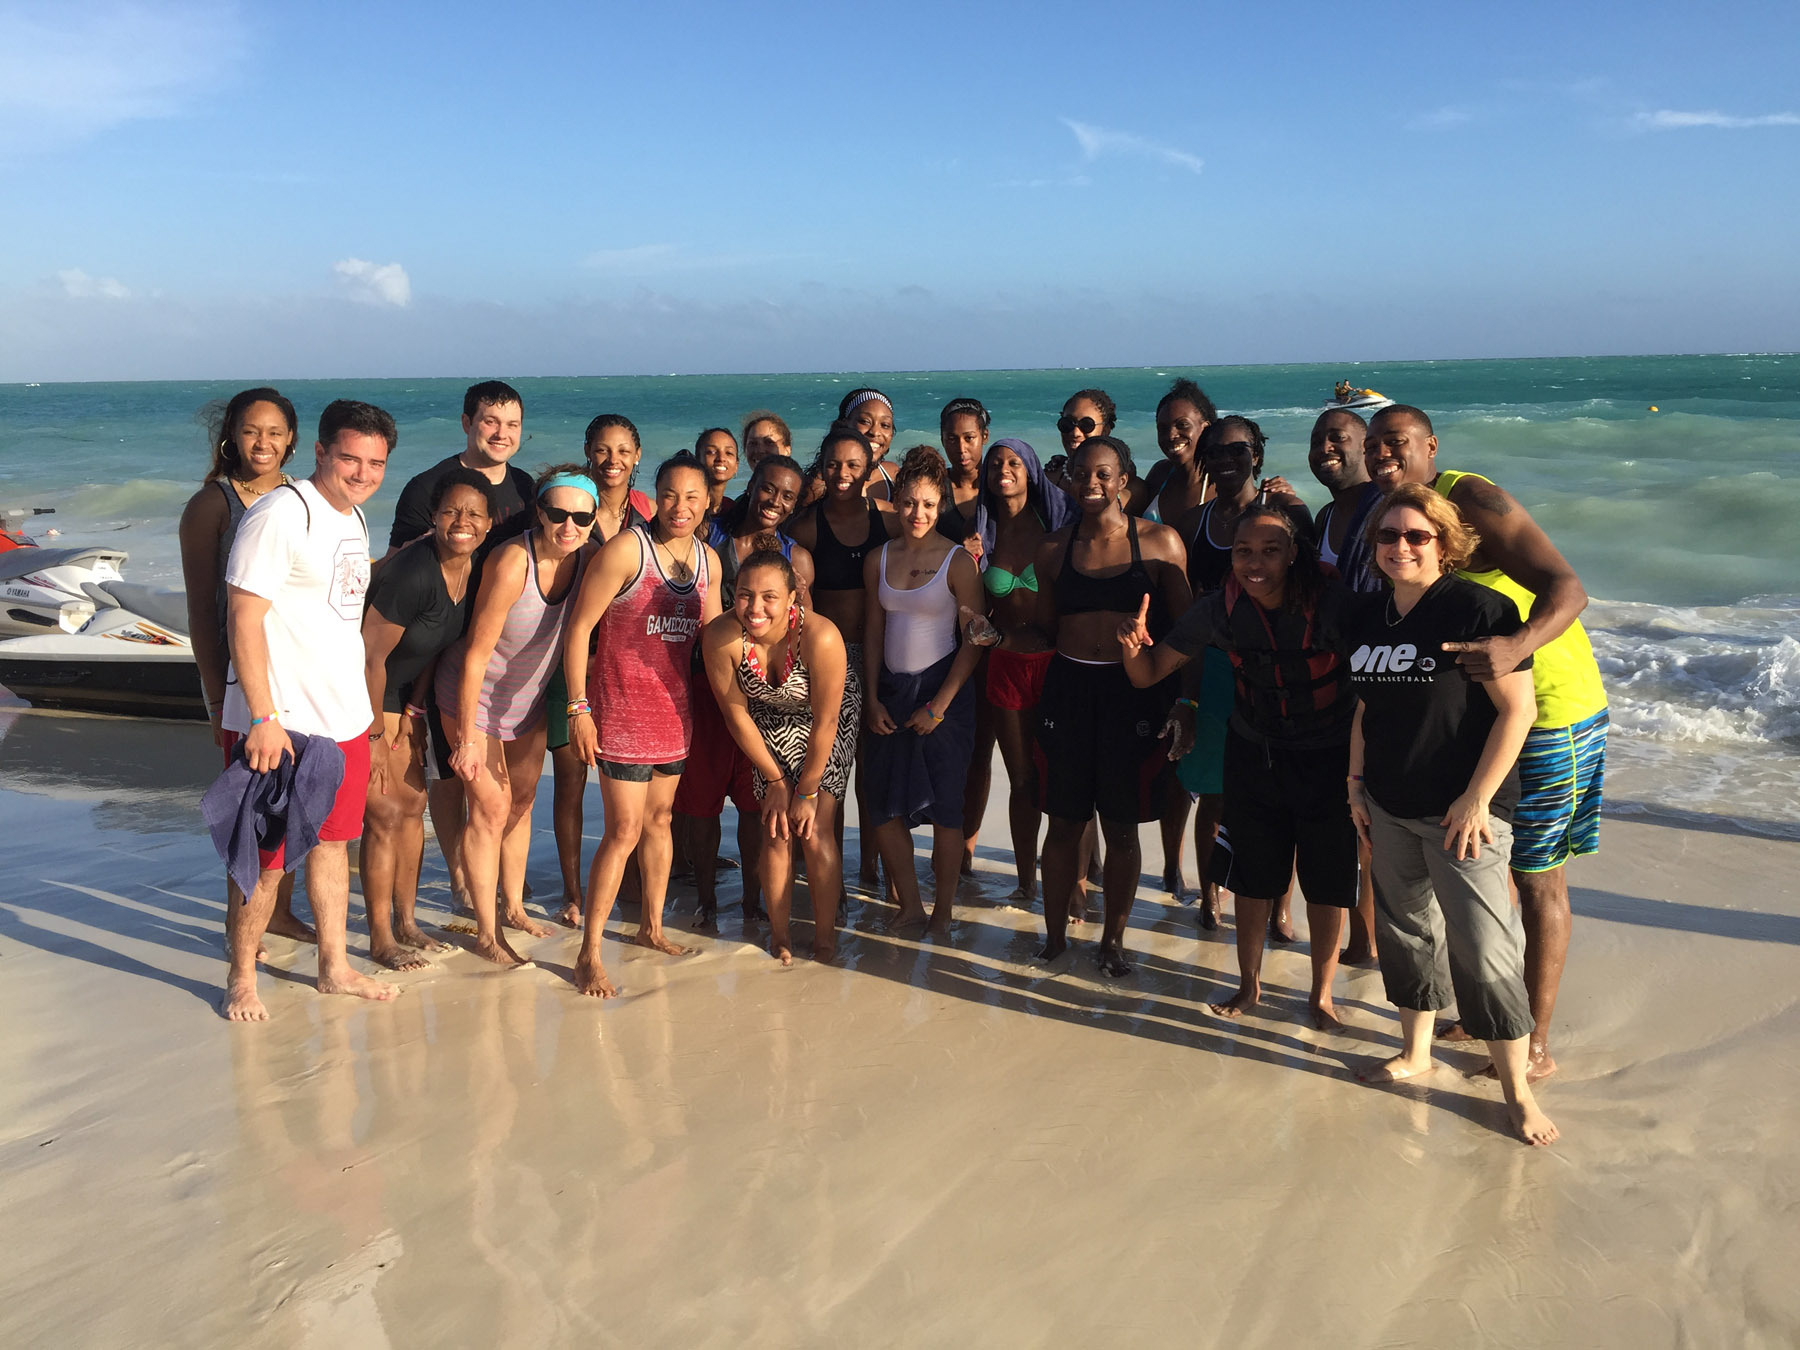 Warm up with a look back at Women's Basketball fun in the Bahamas